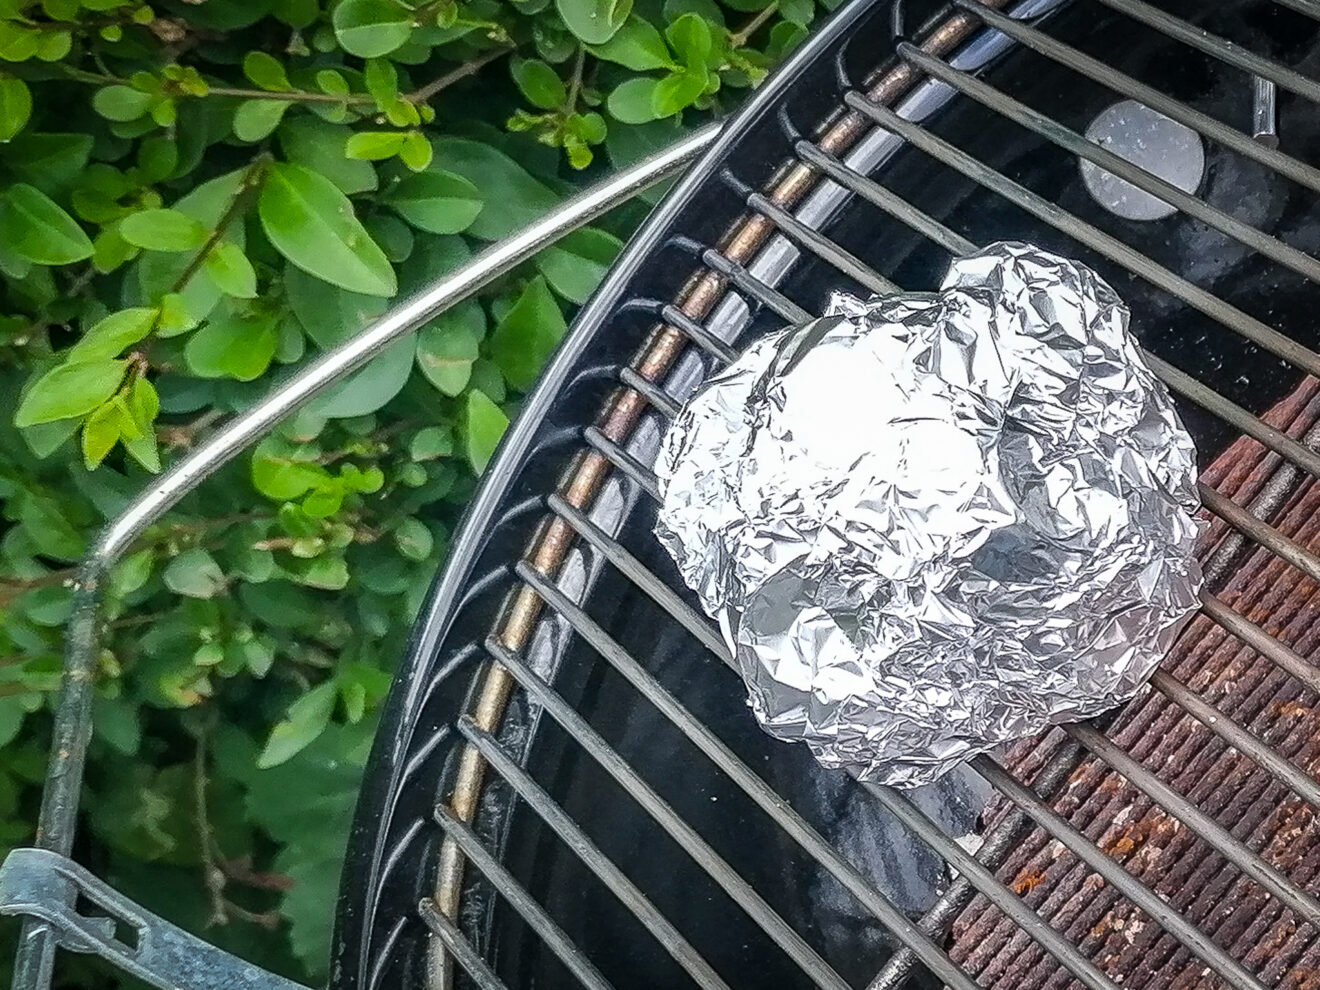 Cleaning your barbecue cooking grill